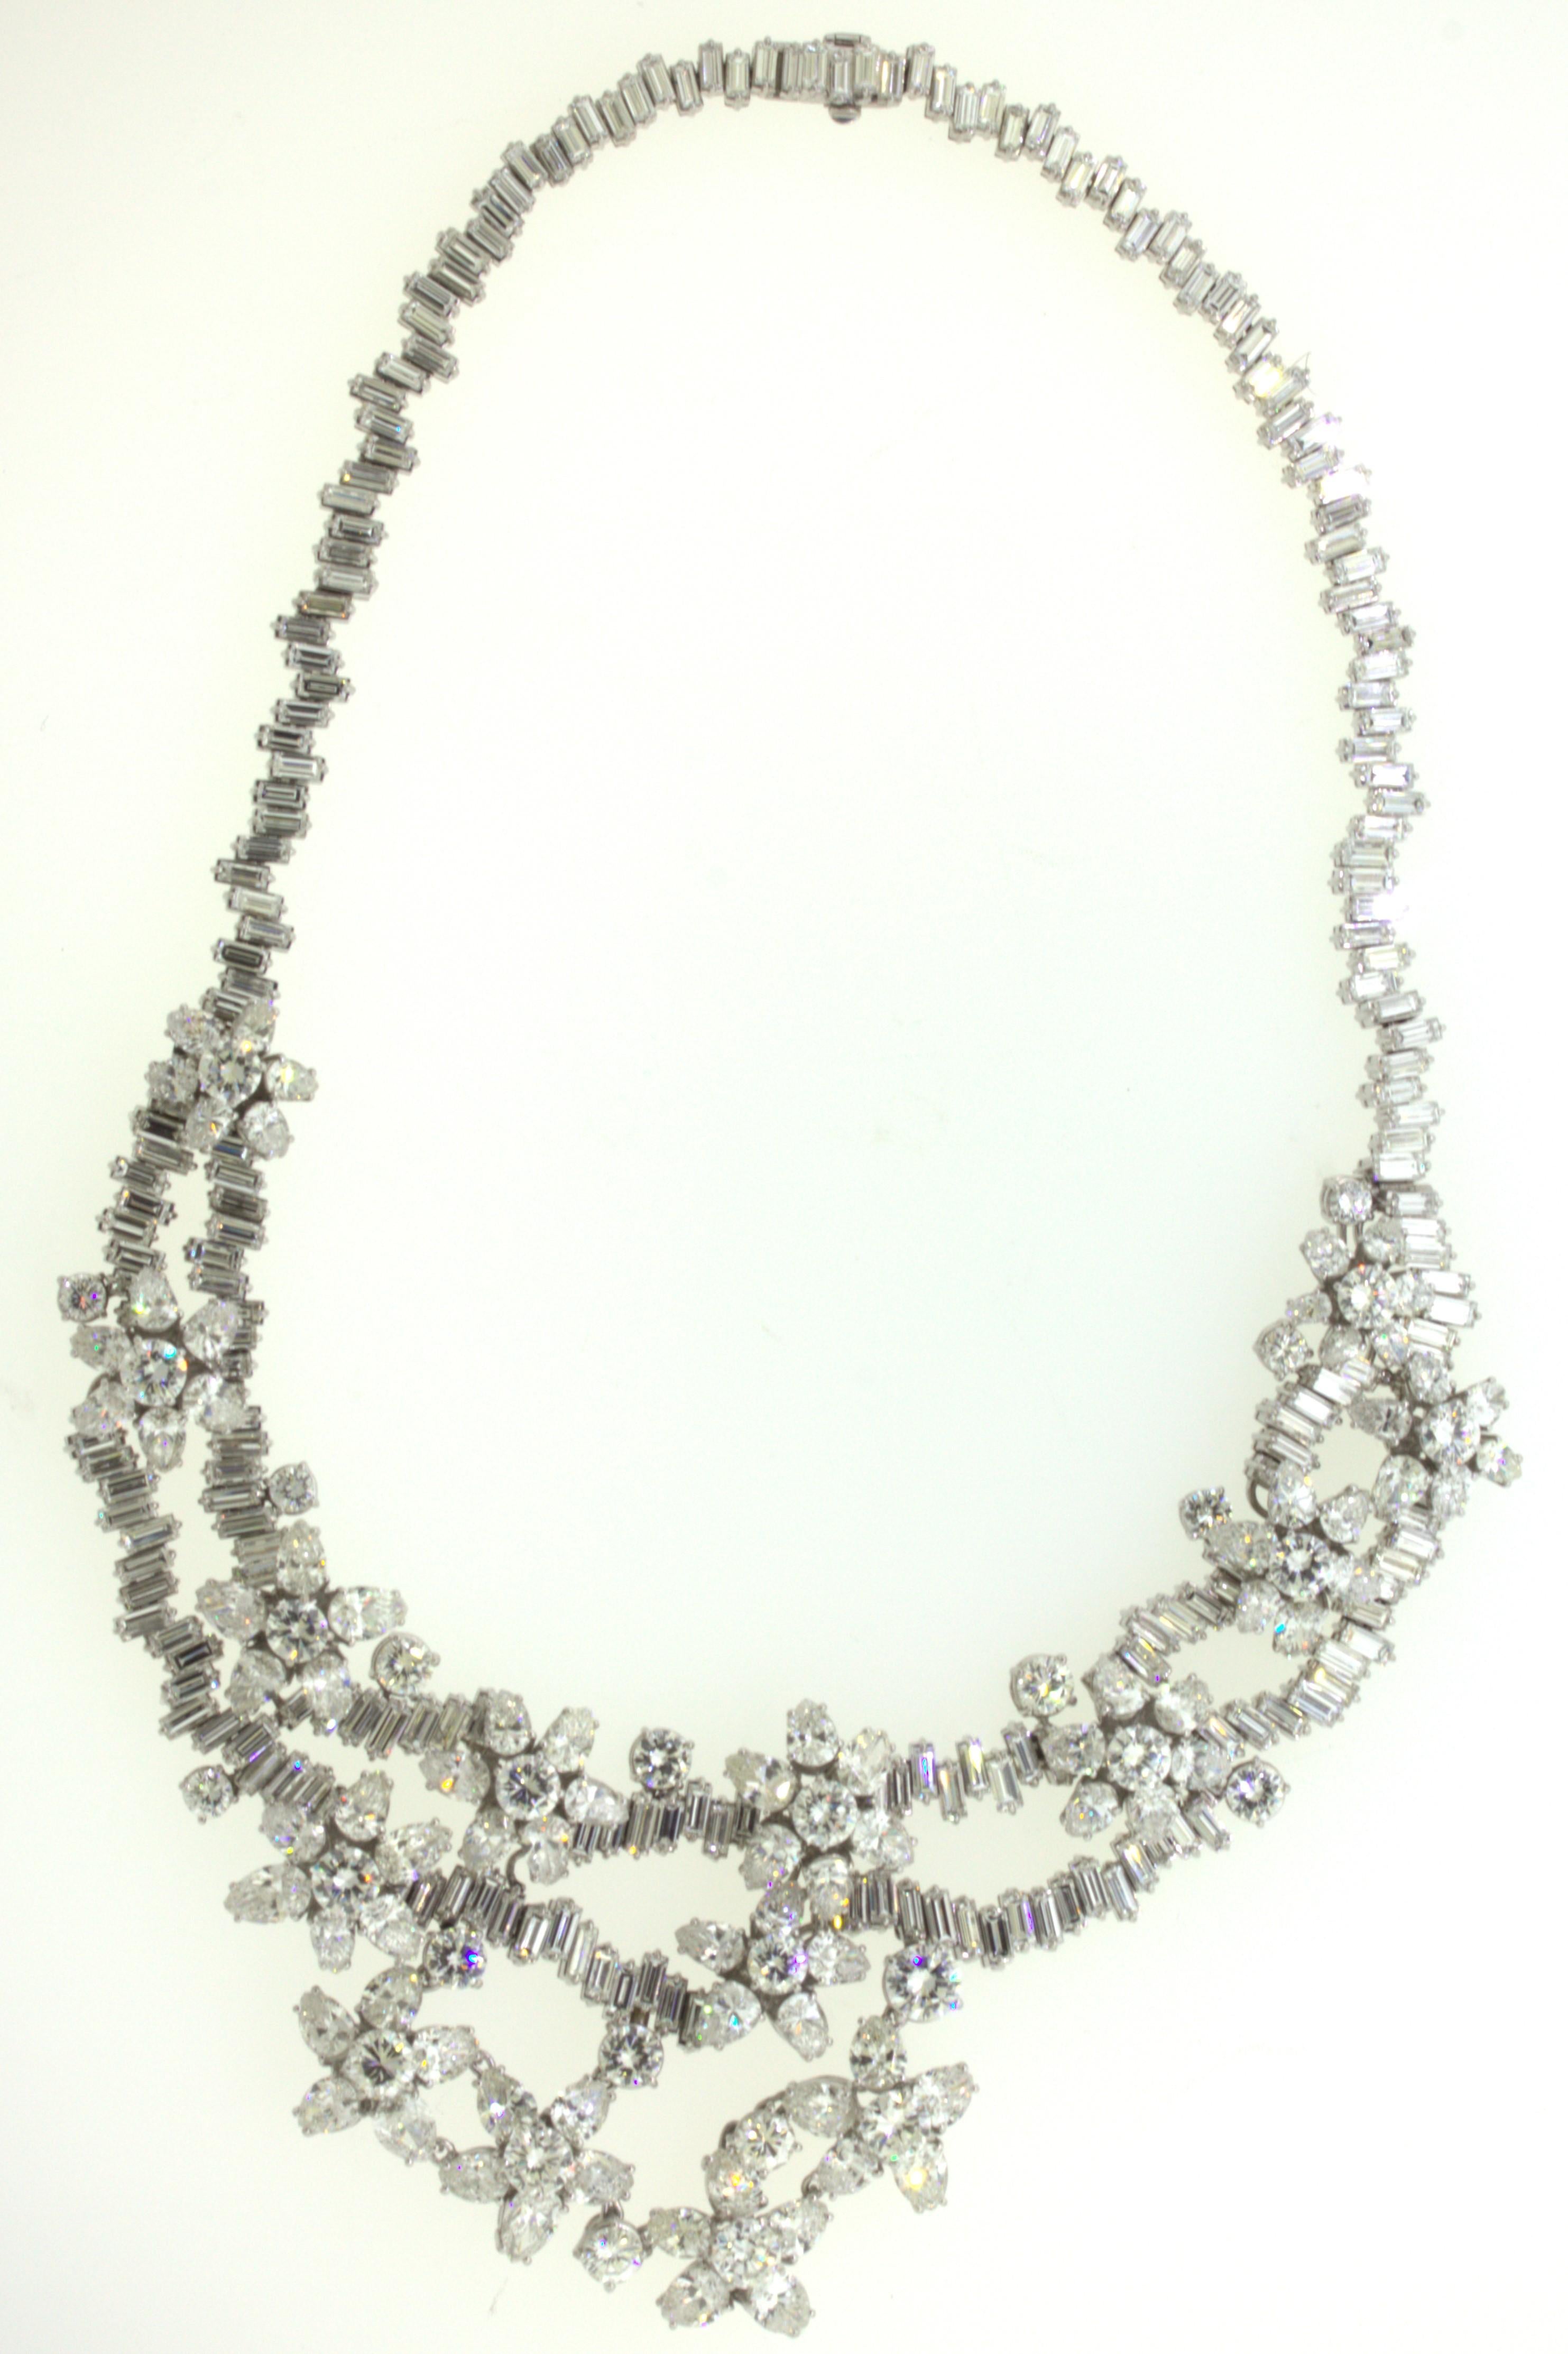 A treasure from the 1950’s, this large and impressive diamond necklace is one of a kind. It features a total of 84 carats of large sizes round brilliant, baguette, and pear-shape diamonds set in clusters depicting flowers. The largest round diamond